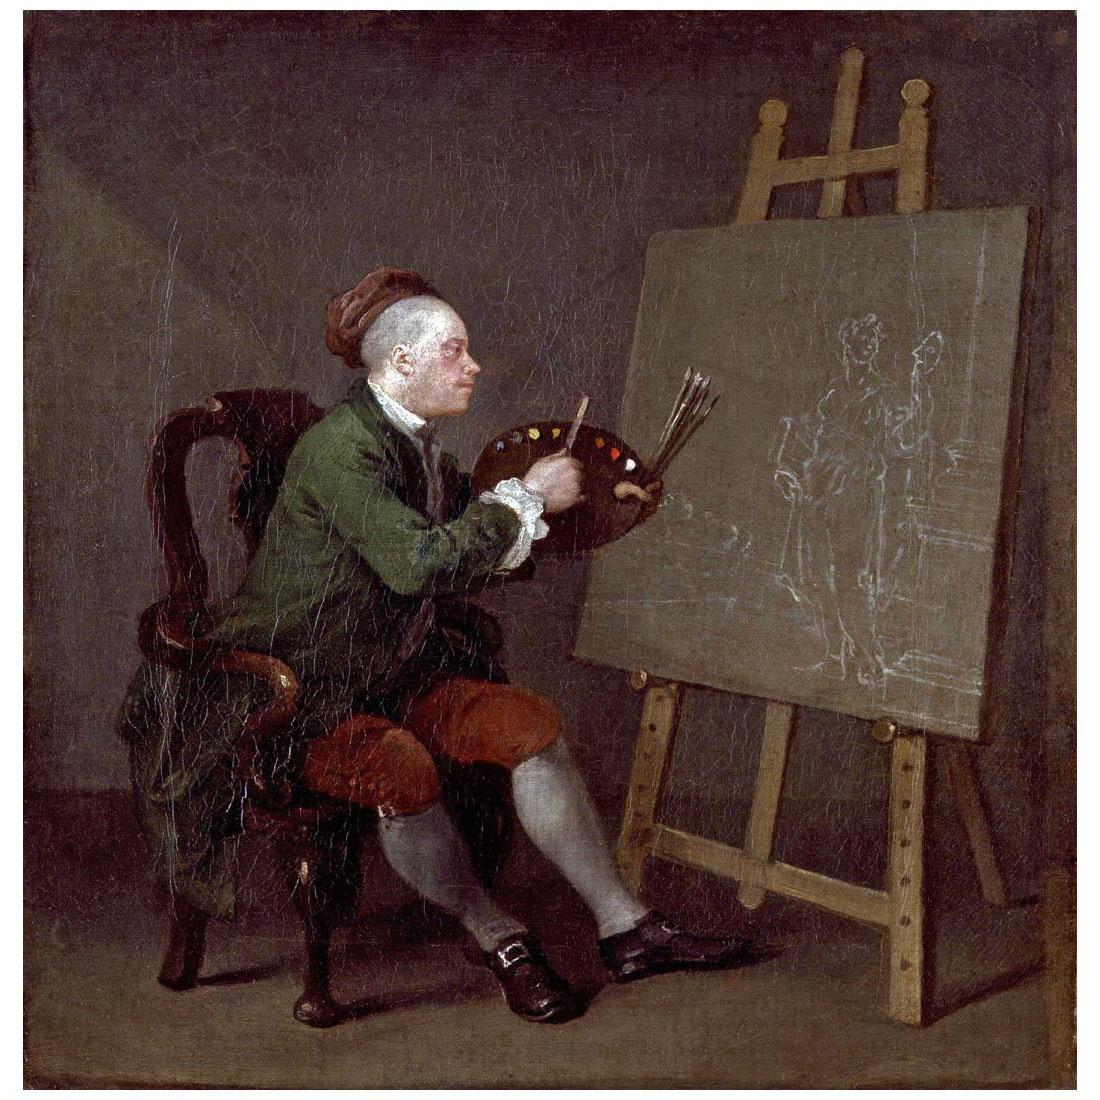 William Hogarth. Hogarth Painting the Comic Muse. 1757-1758. National Portrait Gallery London